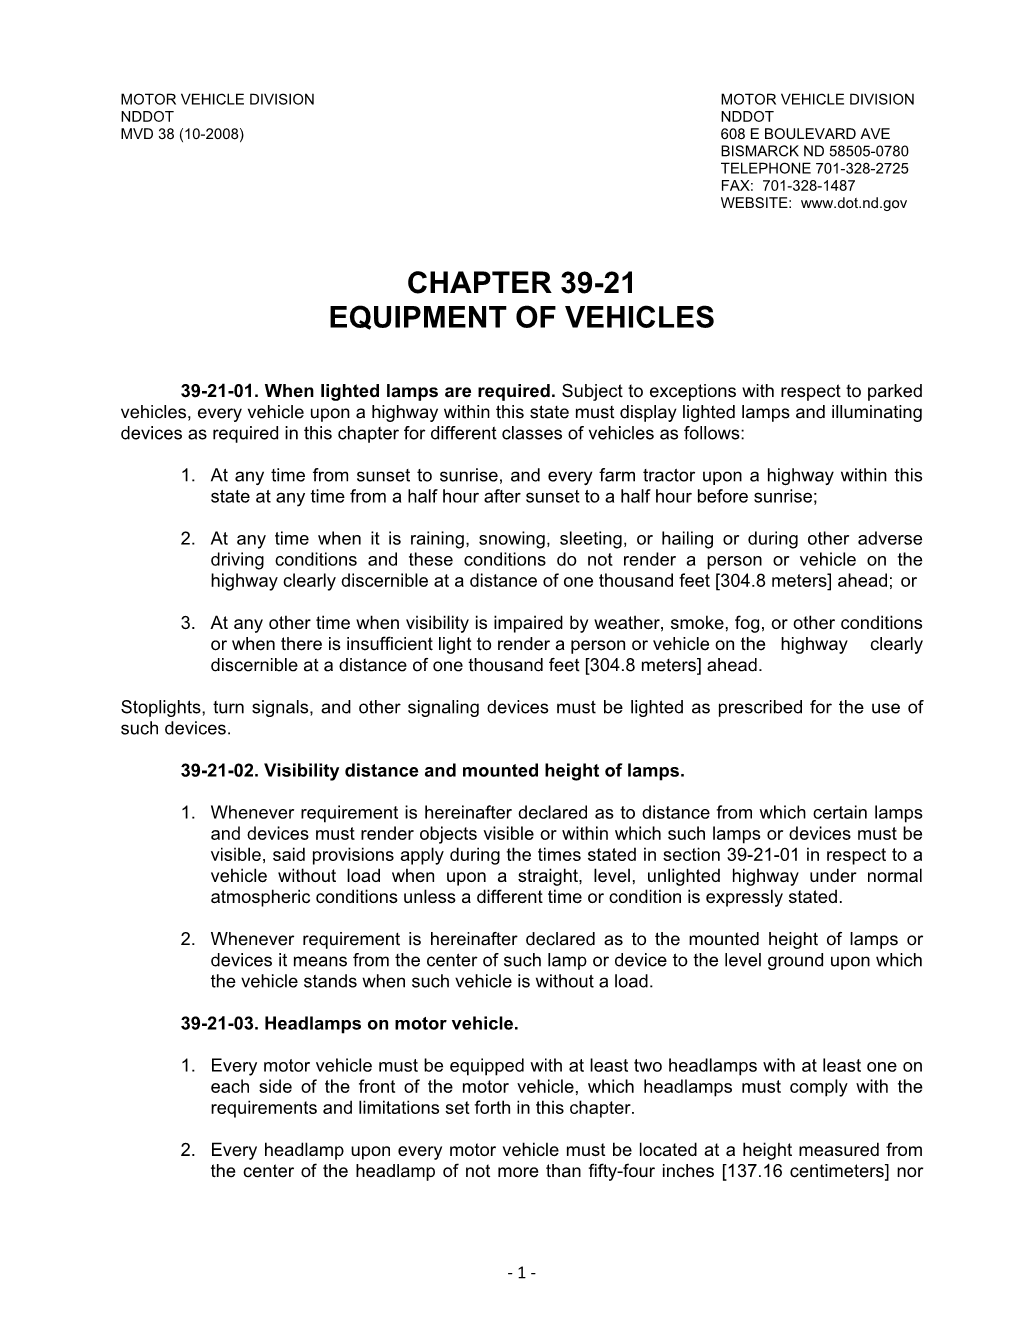 Chapter 39-21 Equipment of Vehicles